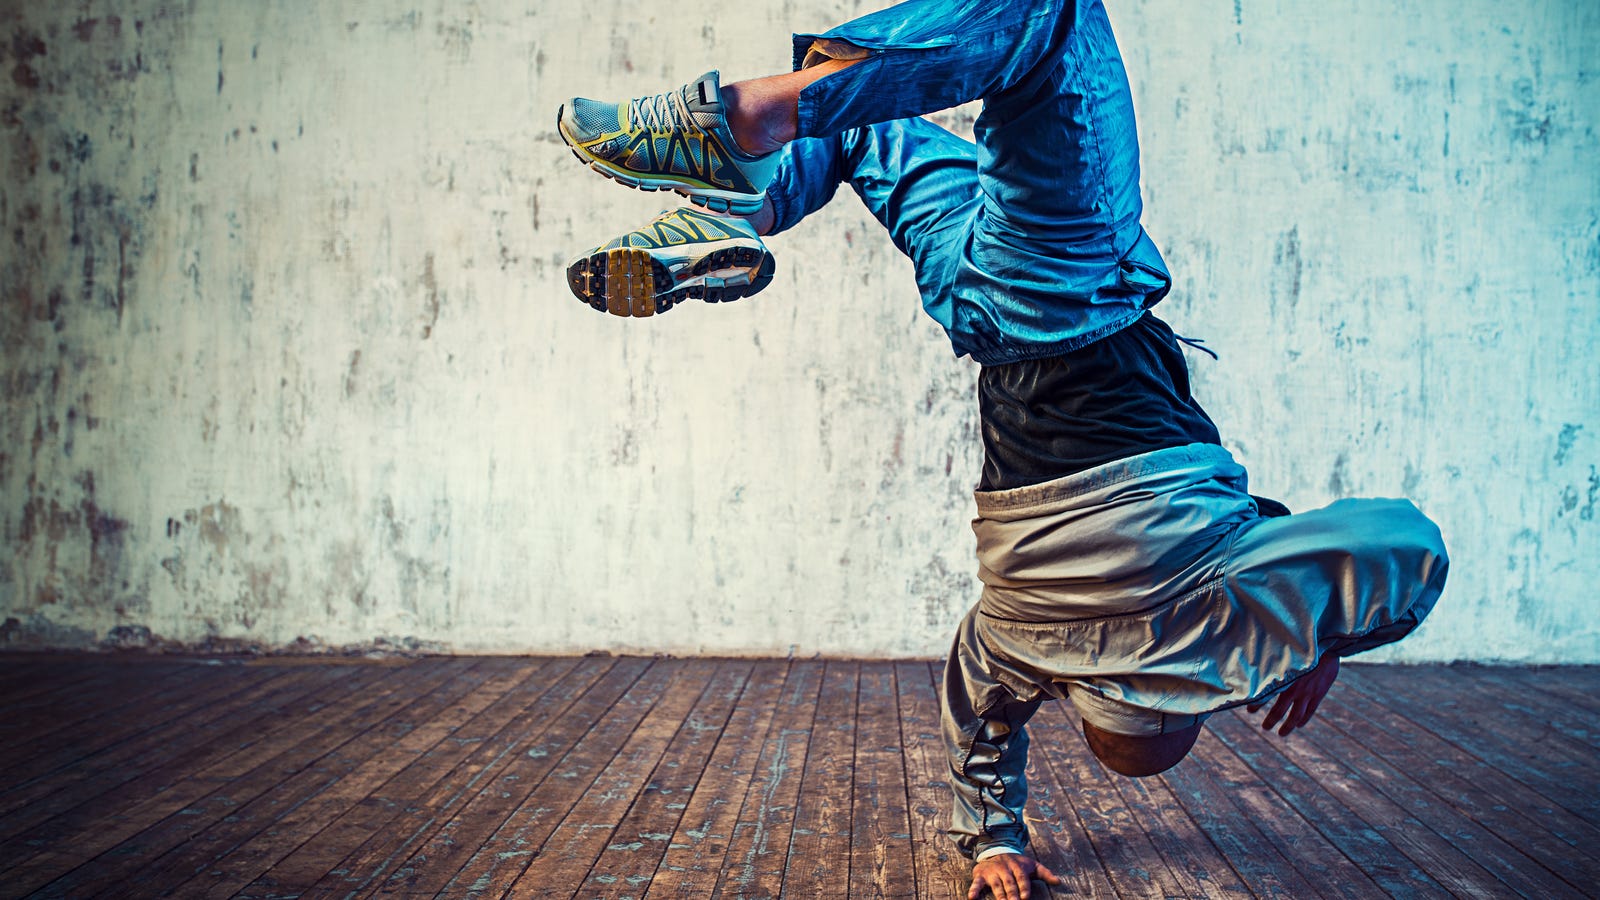 Breakdancing Could Earn You a Gold Medal in the 2024 Olympic Games